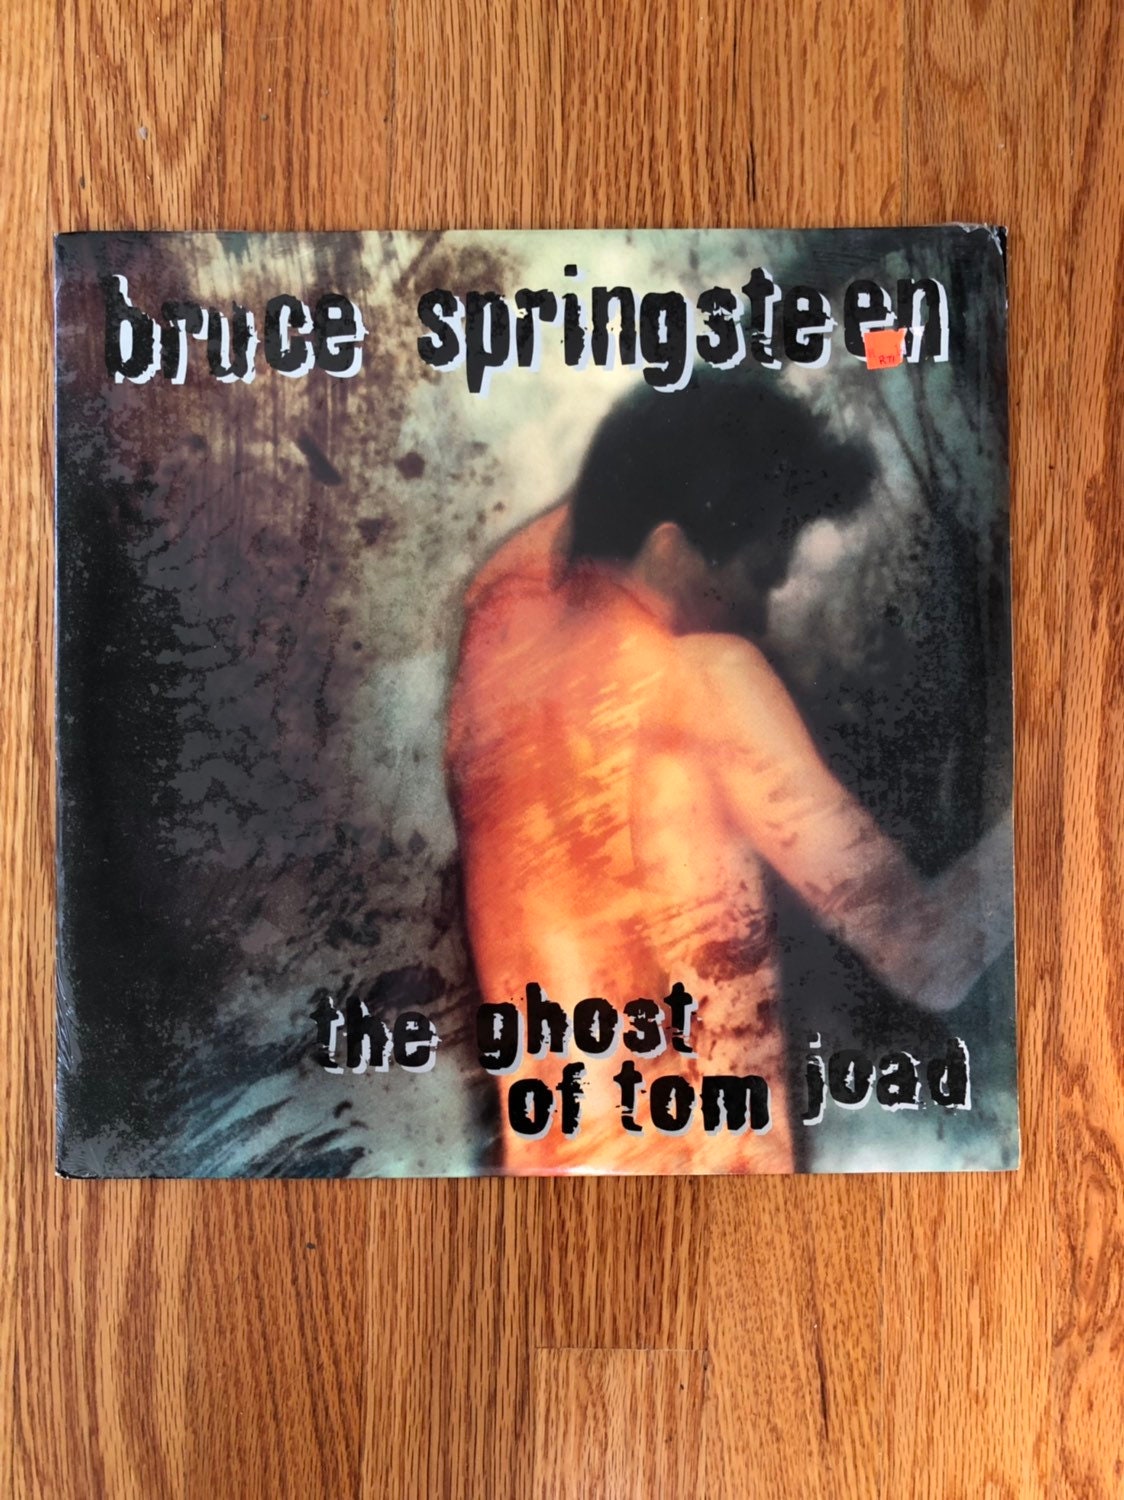 Bruce Springsteen |The Ghost of Tom Joad | 1995 Vintage Records | C 67484 | Vintage Bruce Springsteen